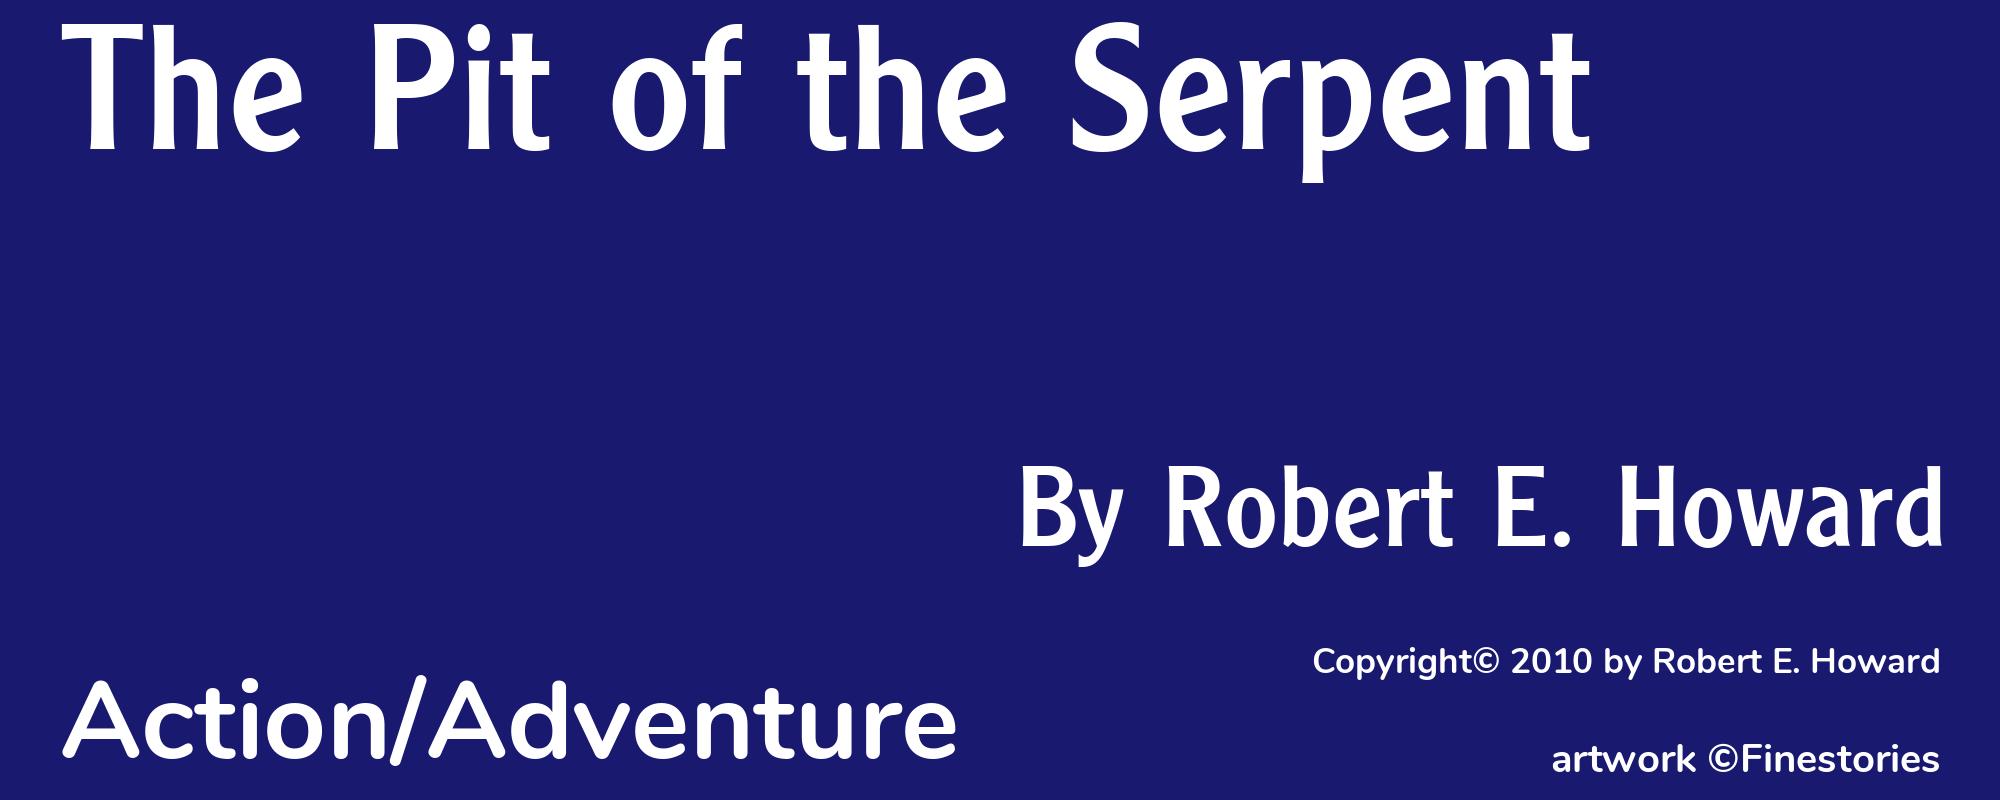 The Pit of the Serpent - Cover